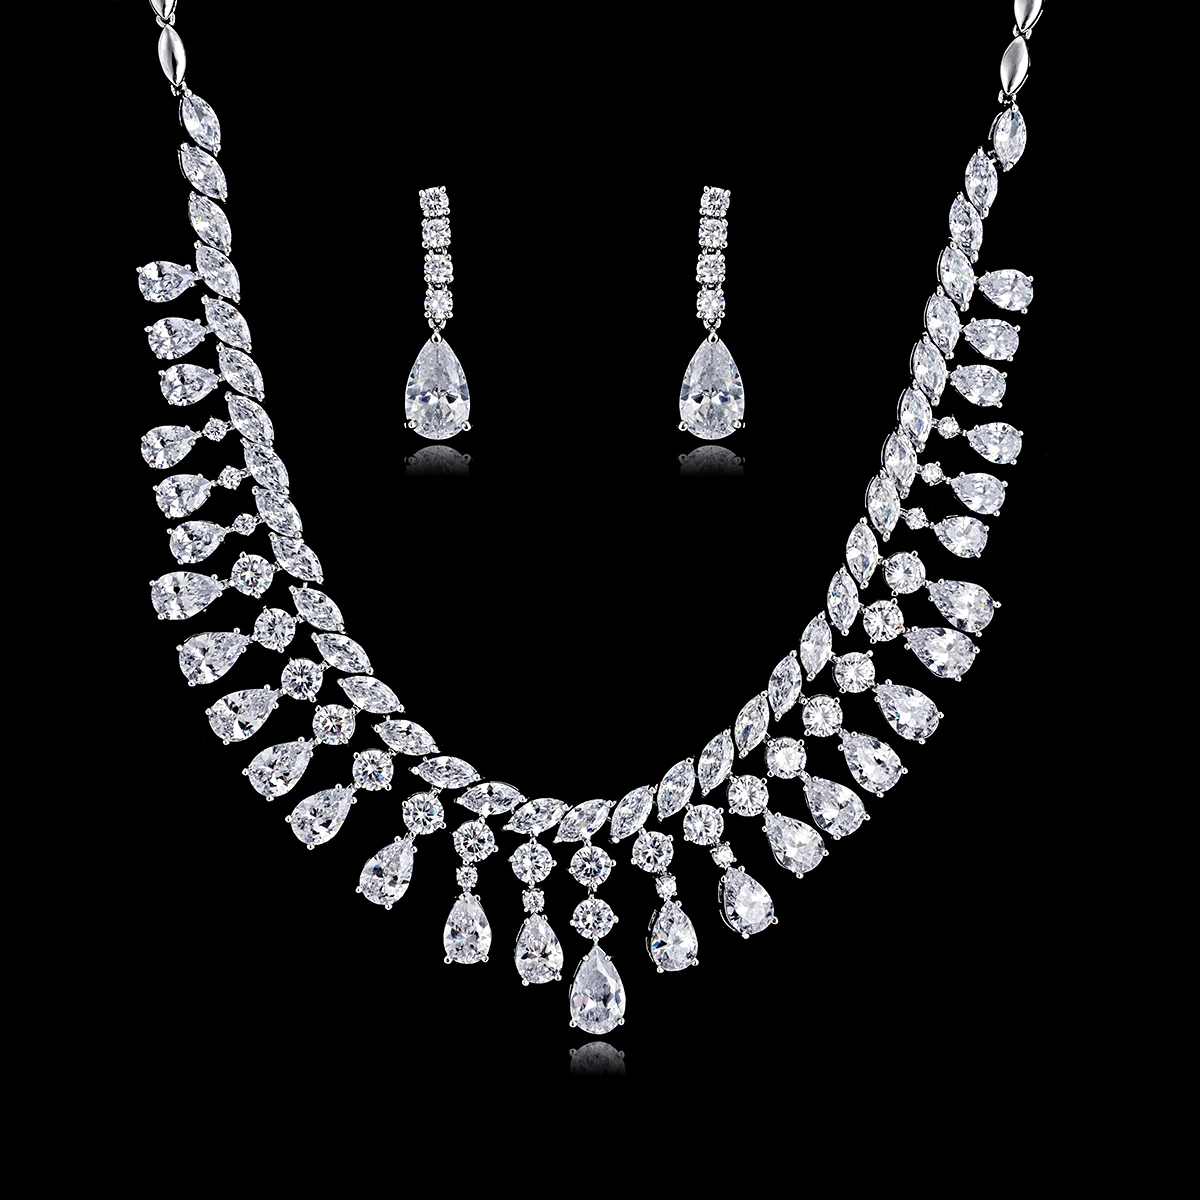 Gorgeous CZ Cubic Zirconia Bridal Wedding Drop Necklace Earring Set for bridesmaid Accessories,Crystal women jewelry sets